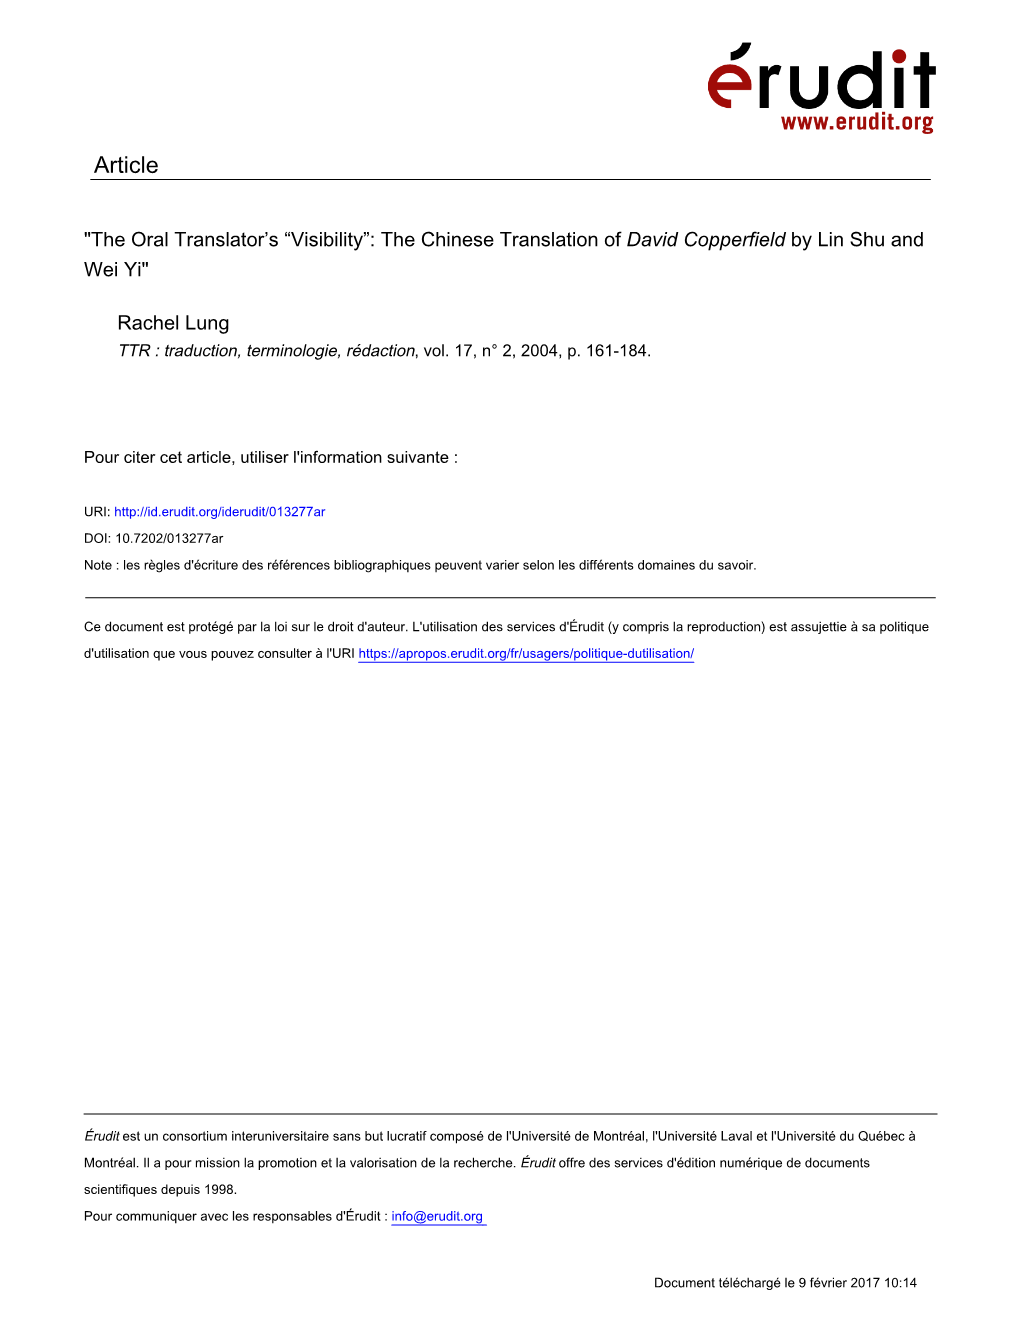 The Oral Translator's “Visibility”: the Chinese Translation Of